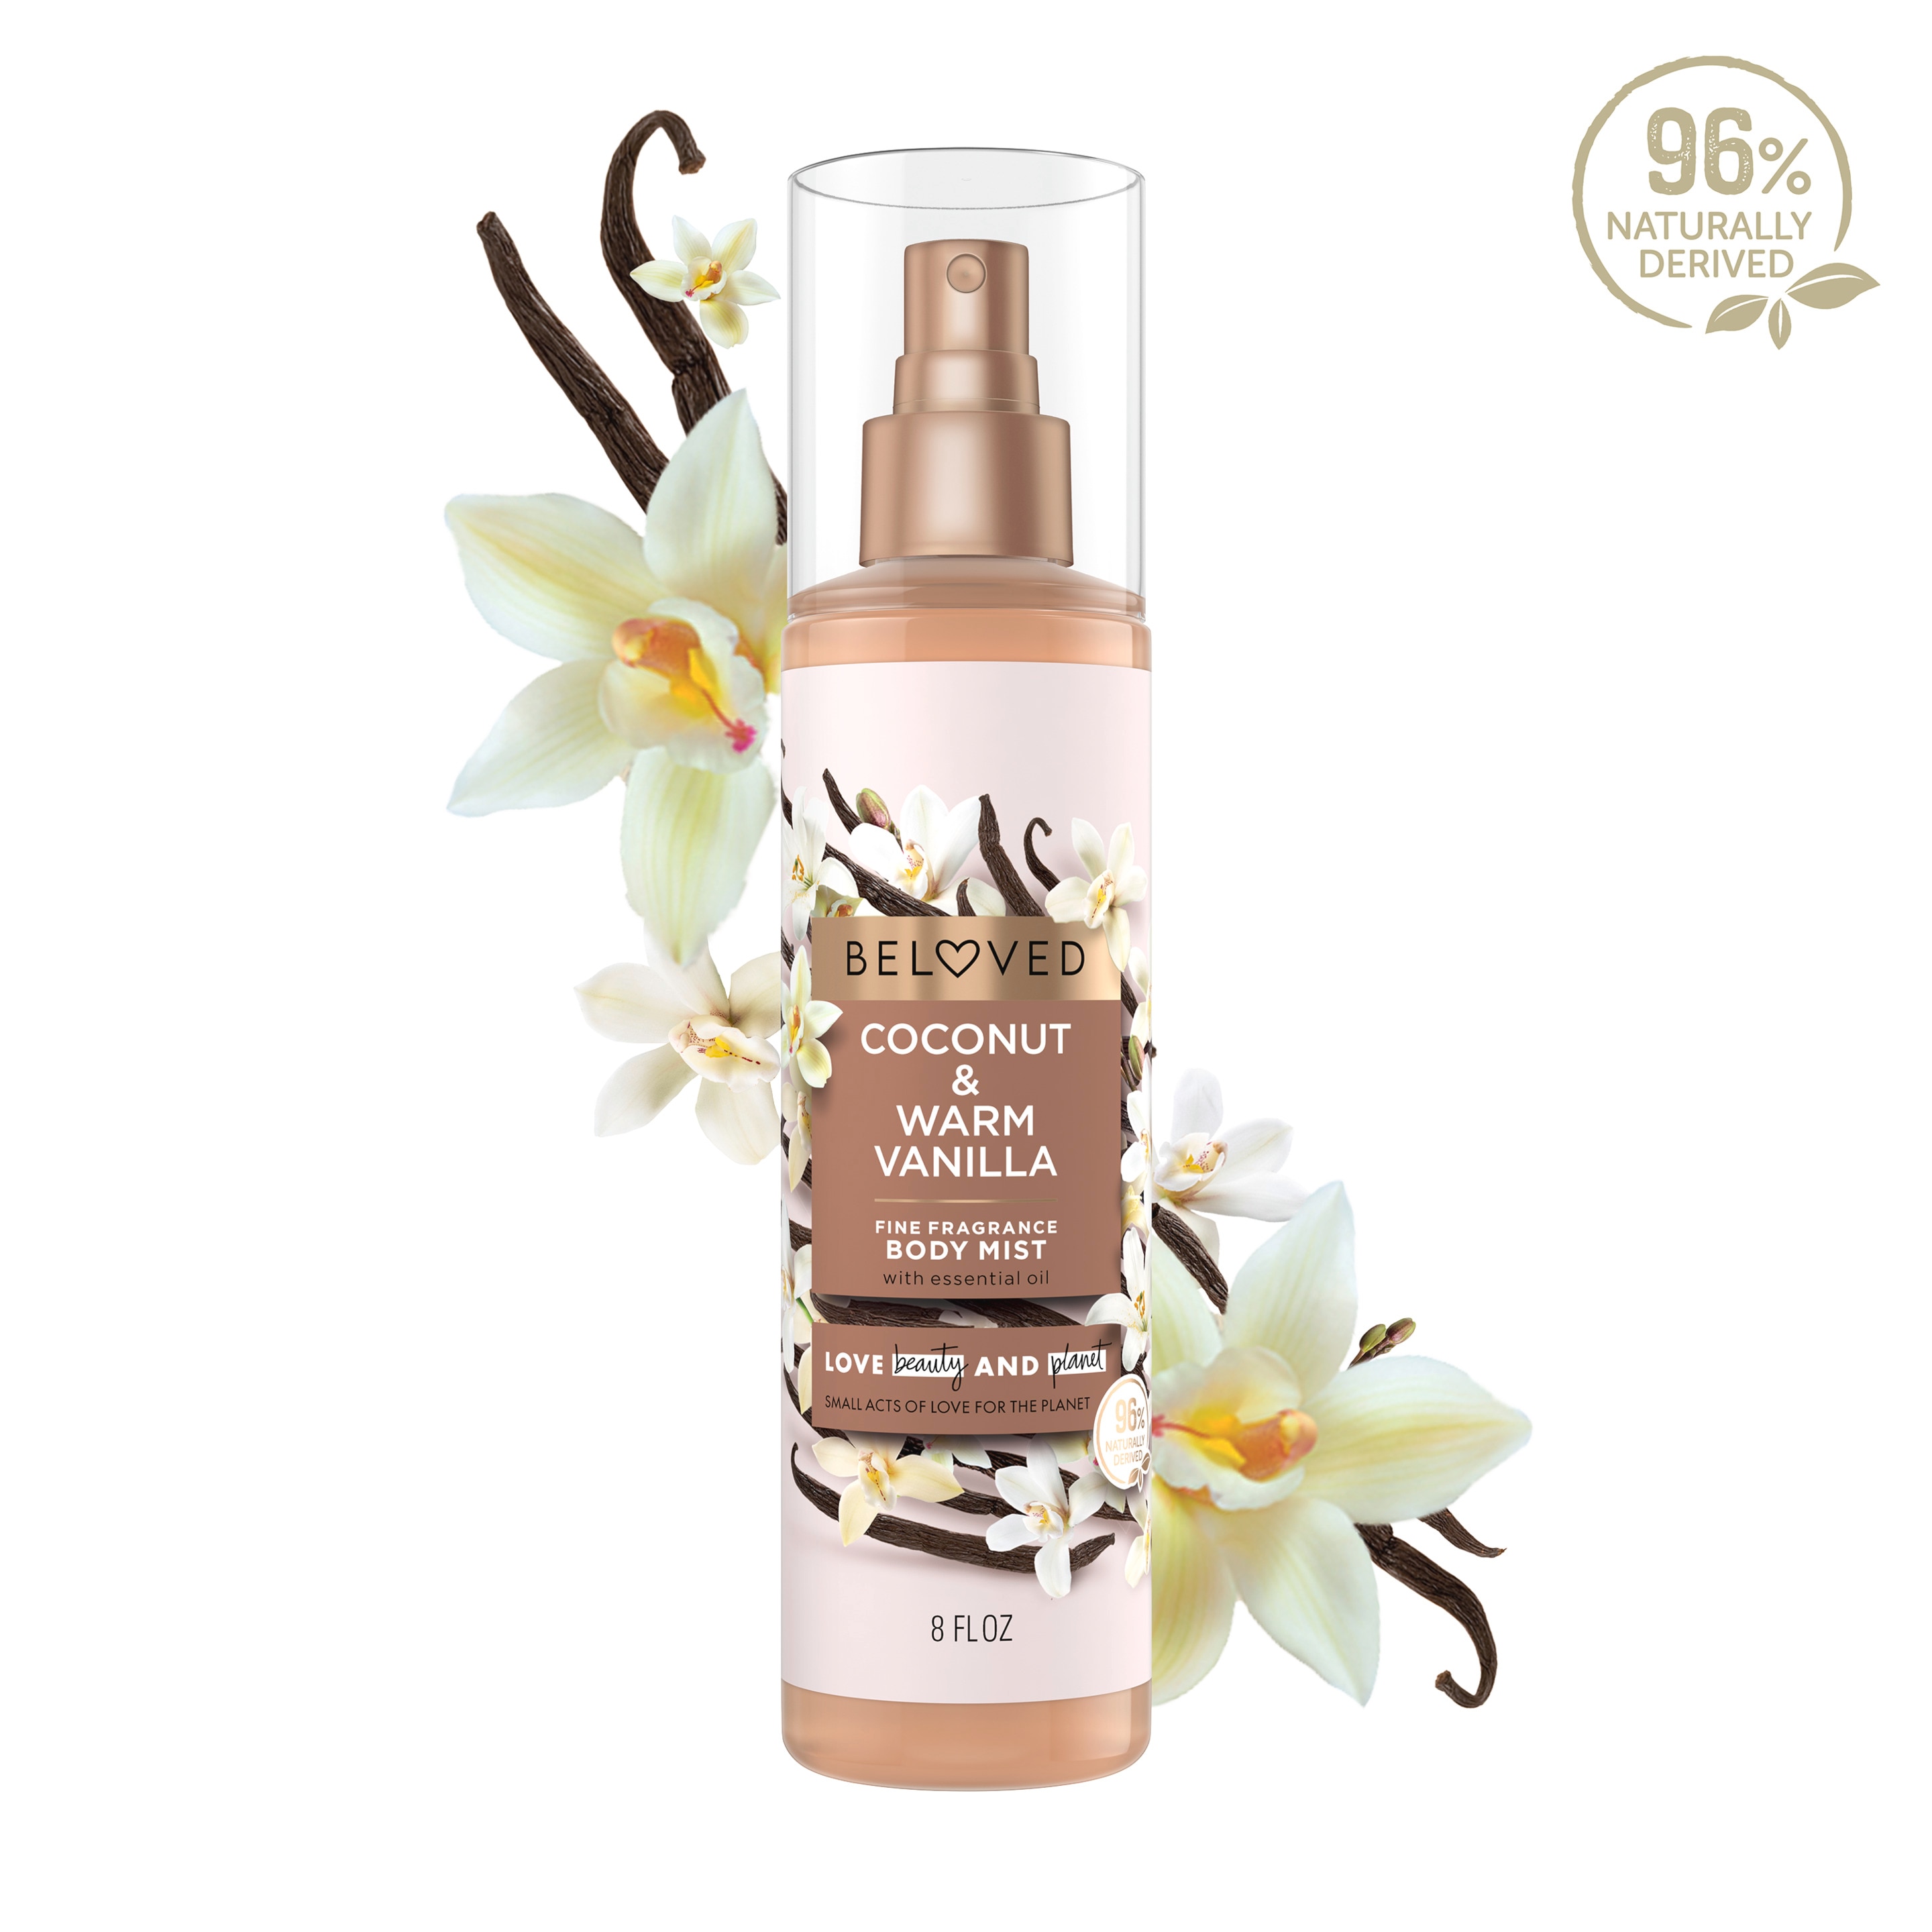 Beloved by Love Beauty and Planet Coconut & Warm Vanilla Body Mist